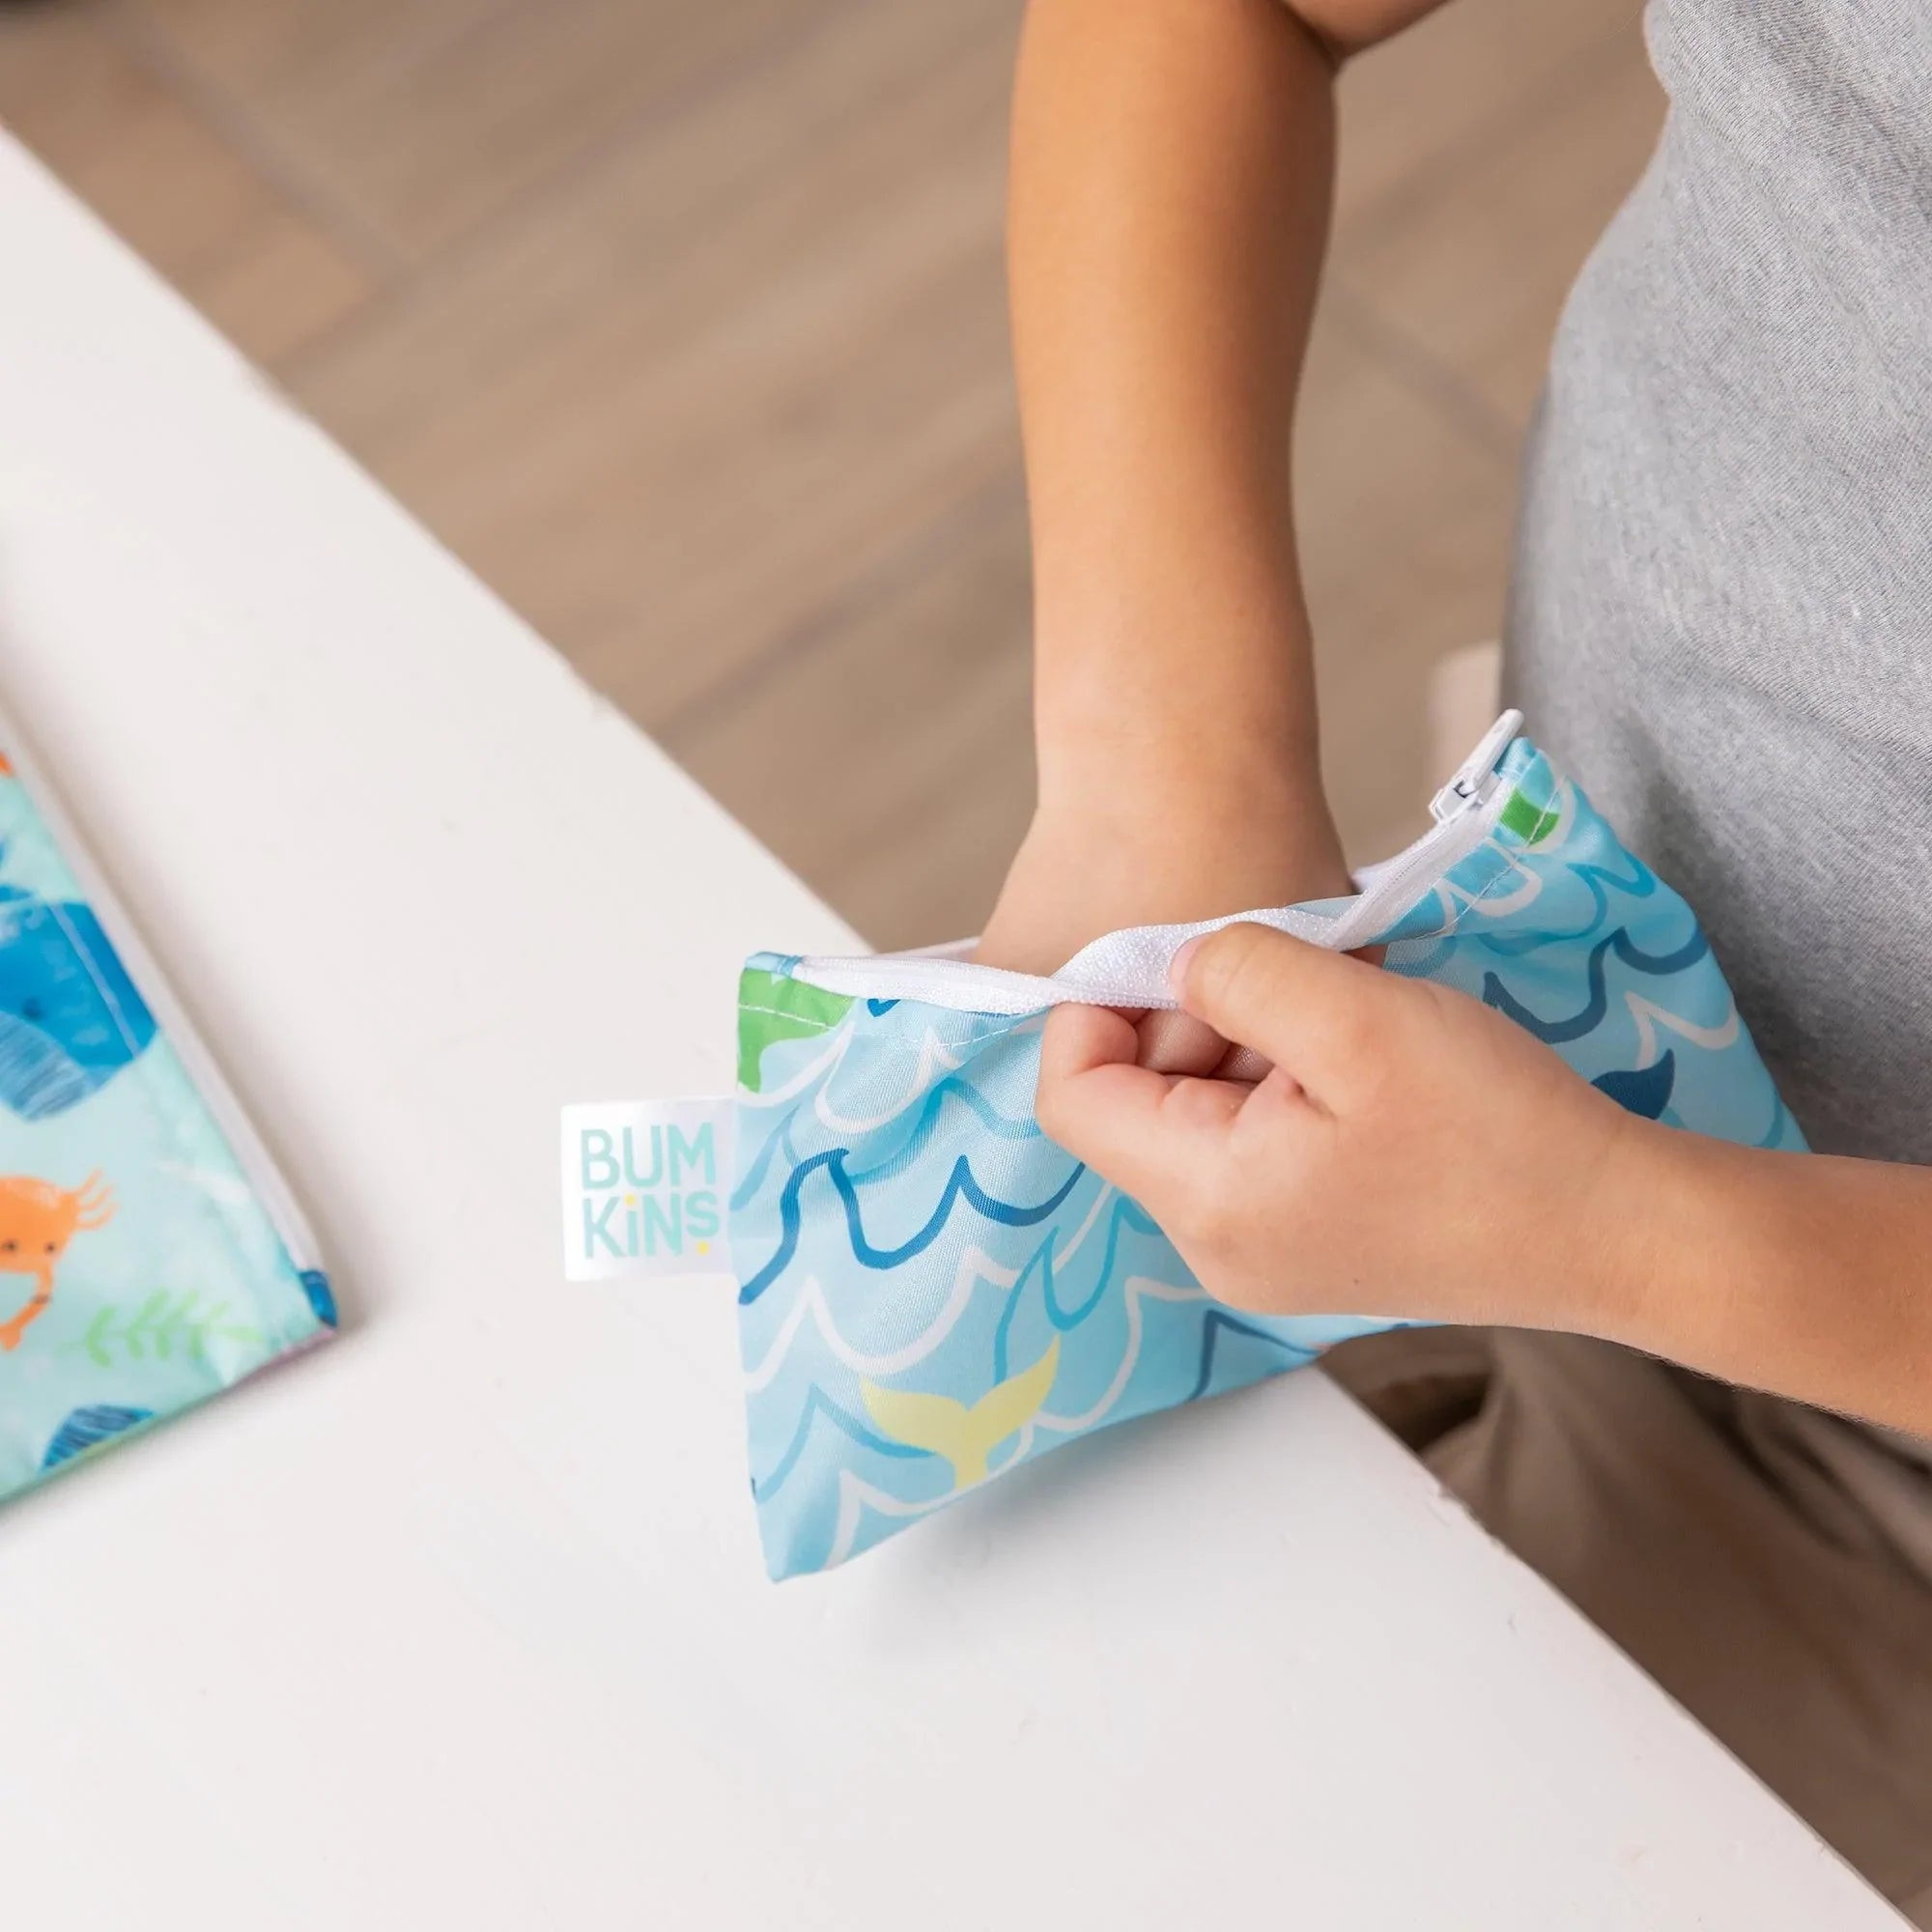 Bumkins Reusable Snack Bags Large Ocean Life & Whale Tail